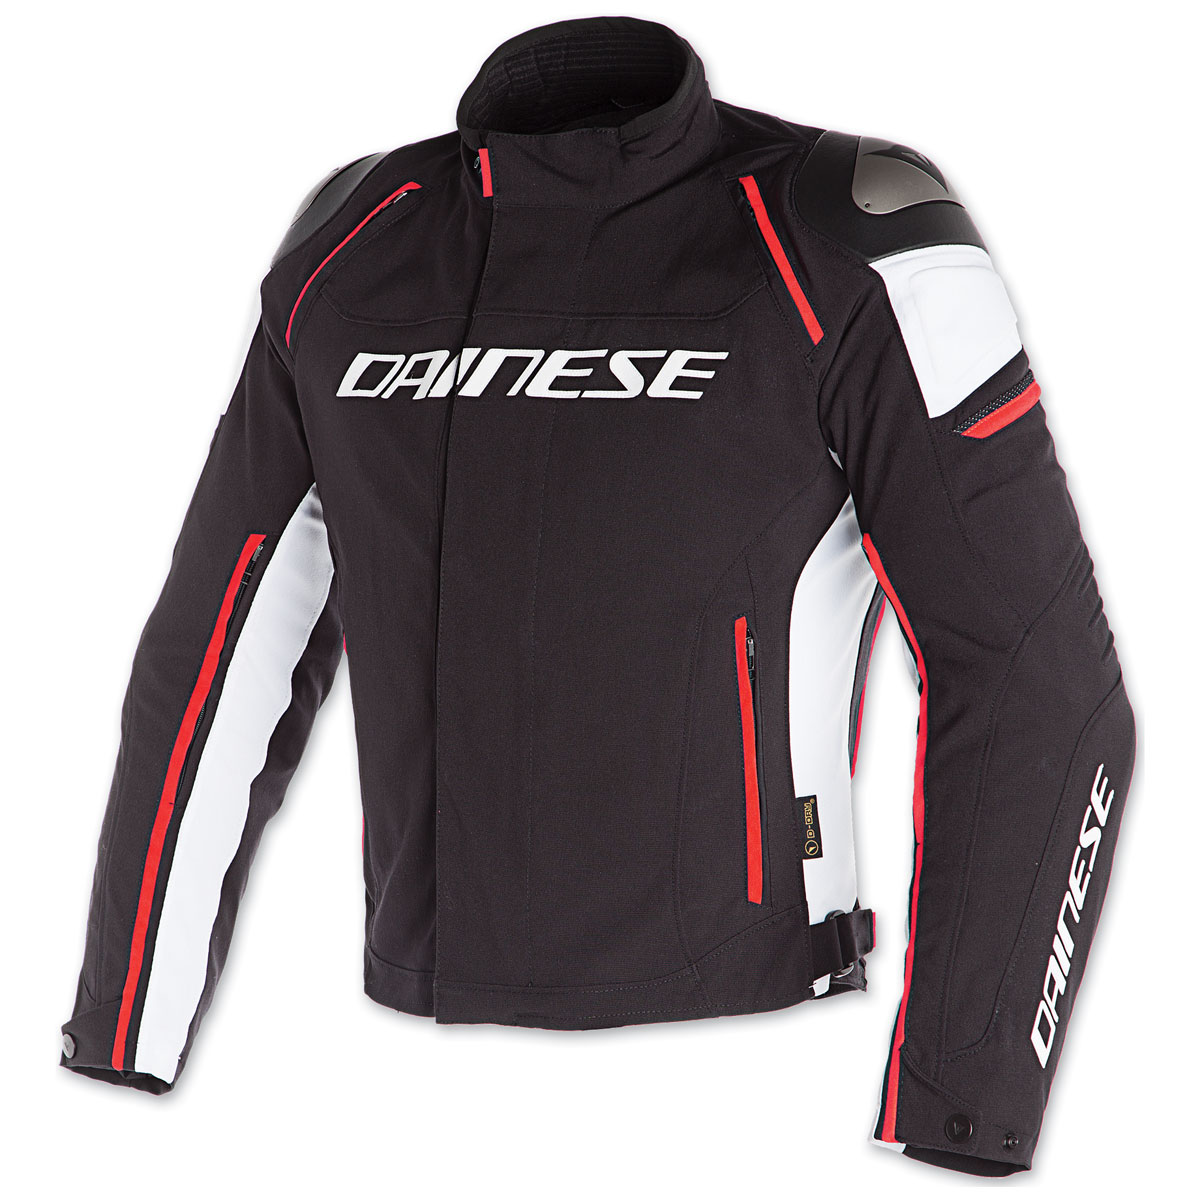 Image of Dainese Racing 3 D-Dry Jacket Black White Fluo Red Size 44 ID 8052644795912